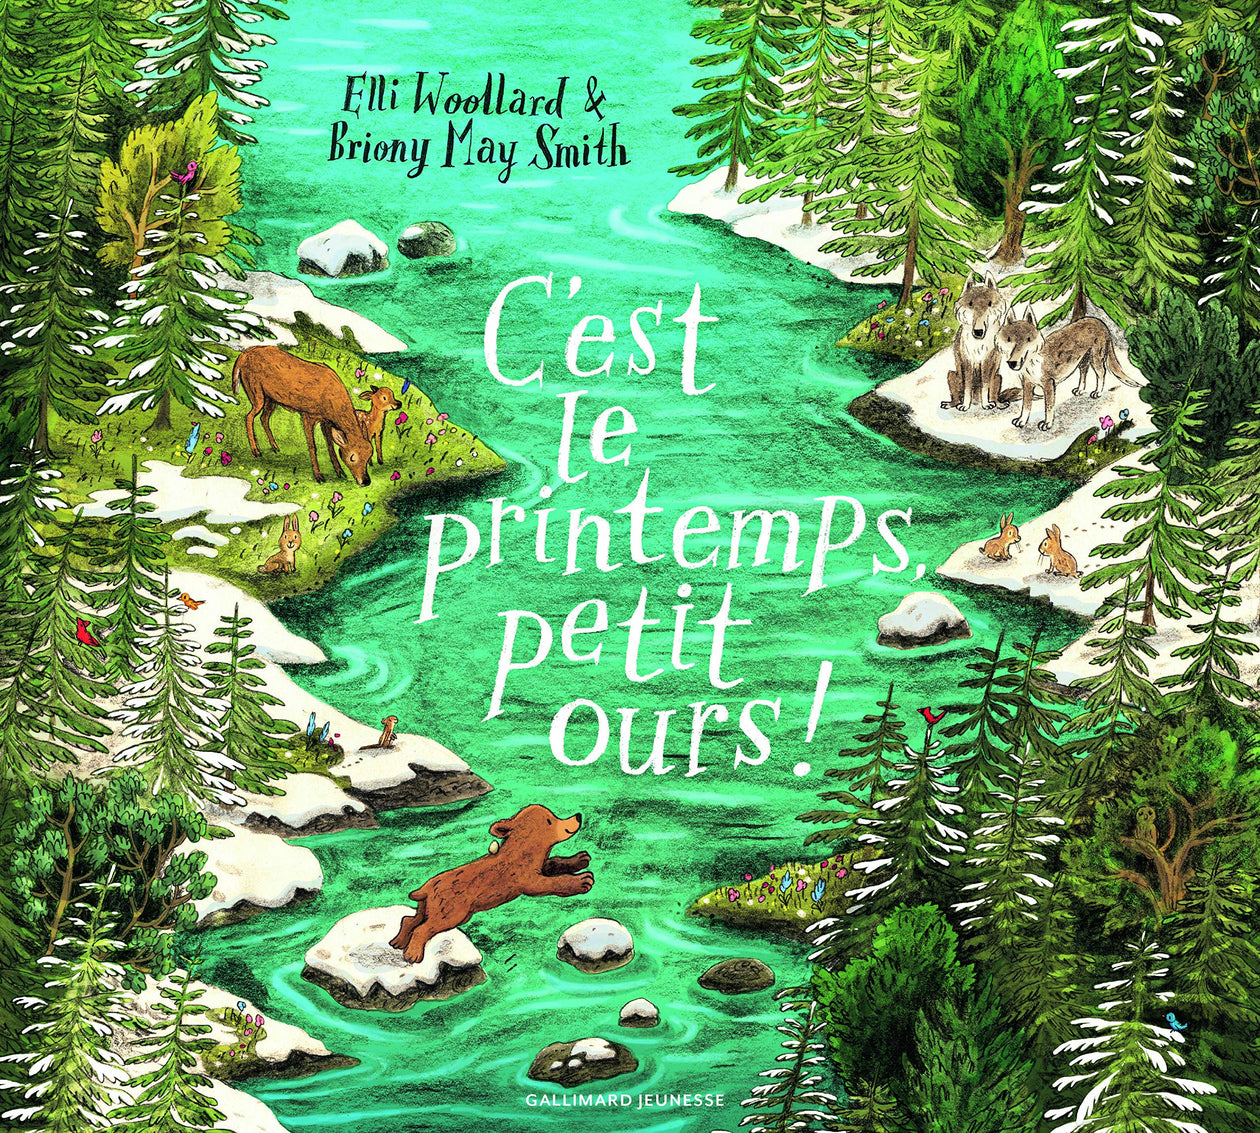 Elli Woolard: C'est le Printemps, Petit Ours! illustrated by Briony May Smith